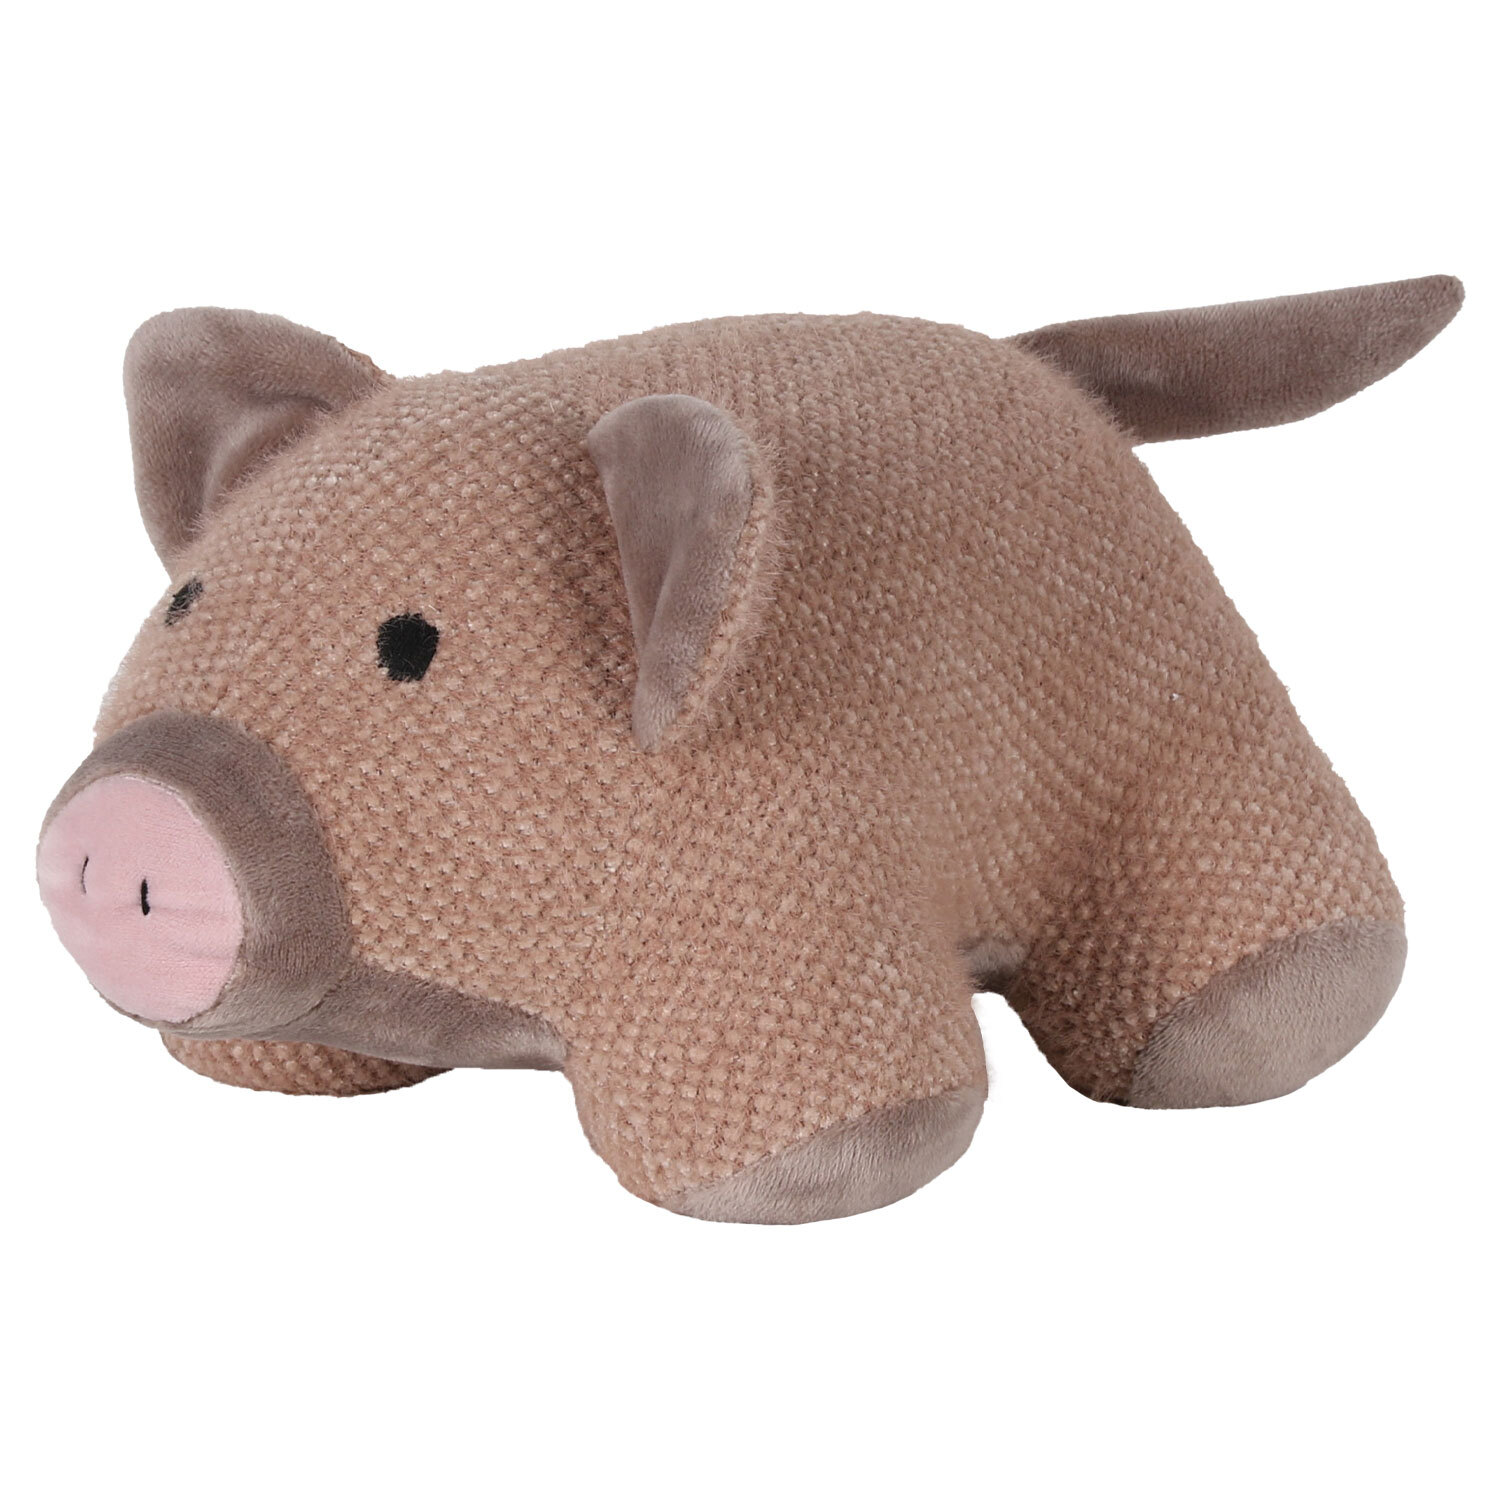 Polly the Pig Decorative Doorstop Image 2